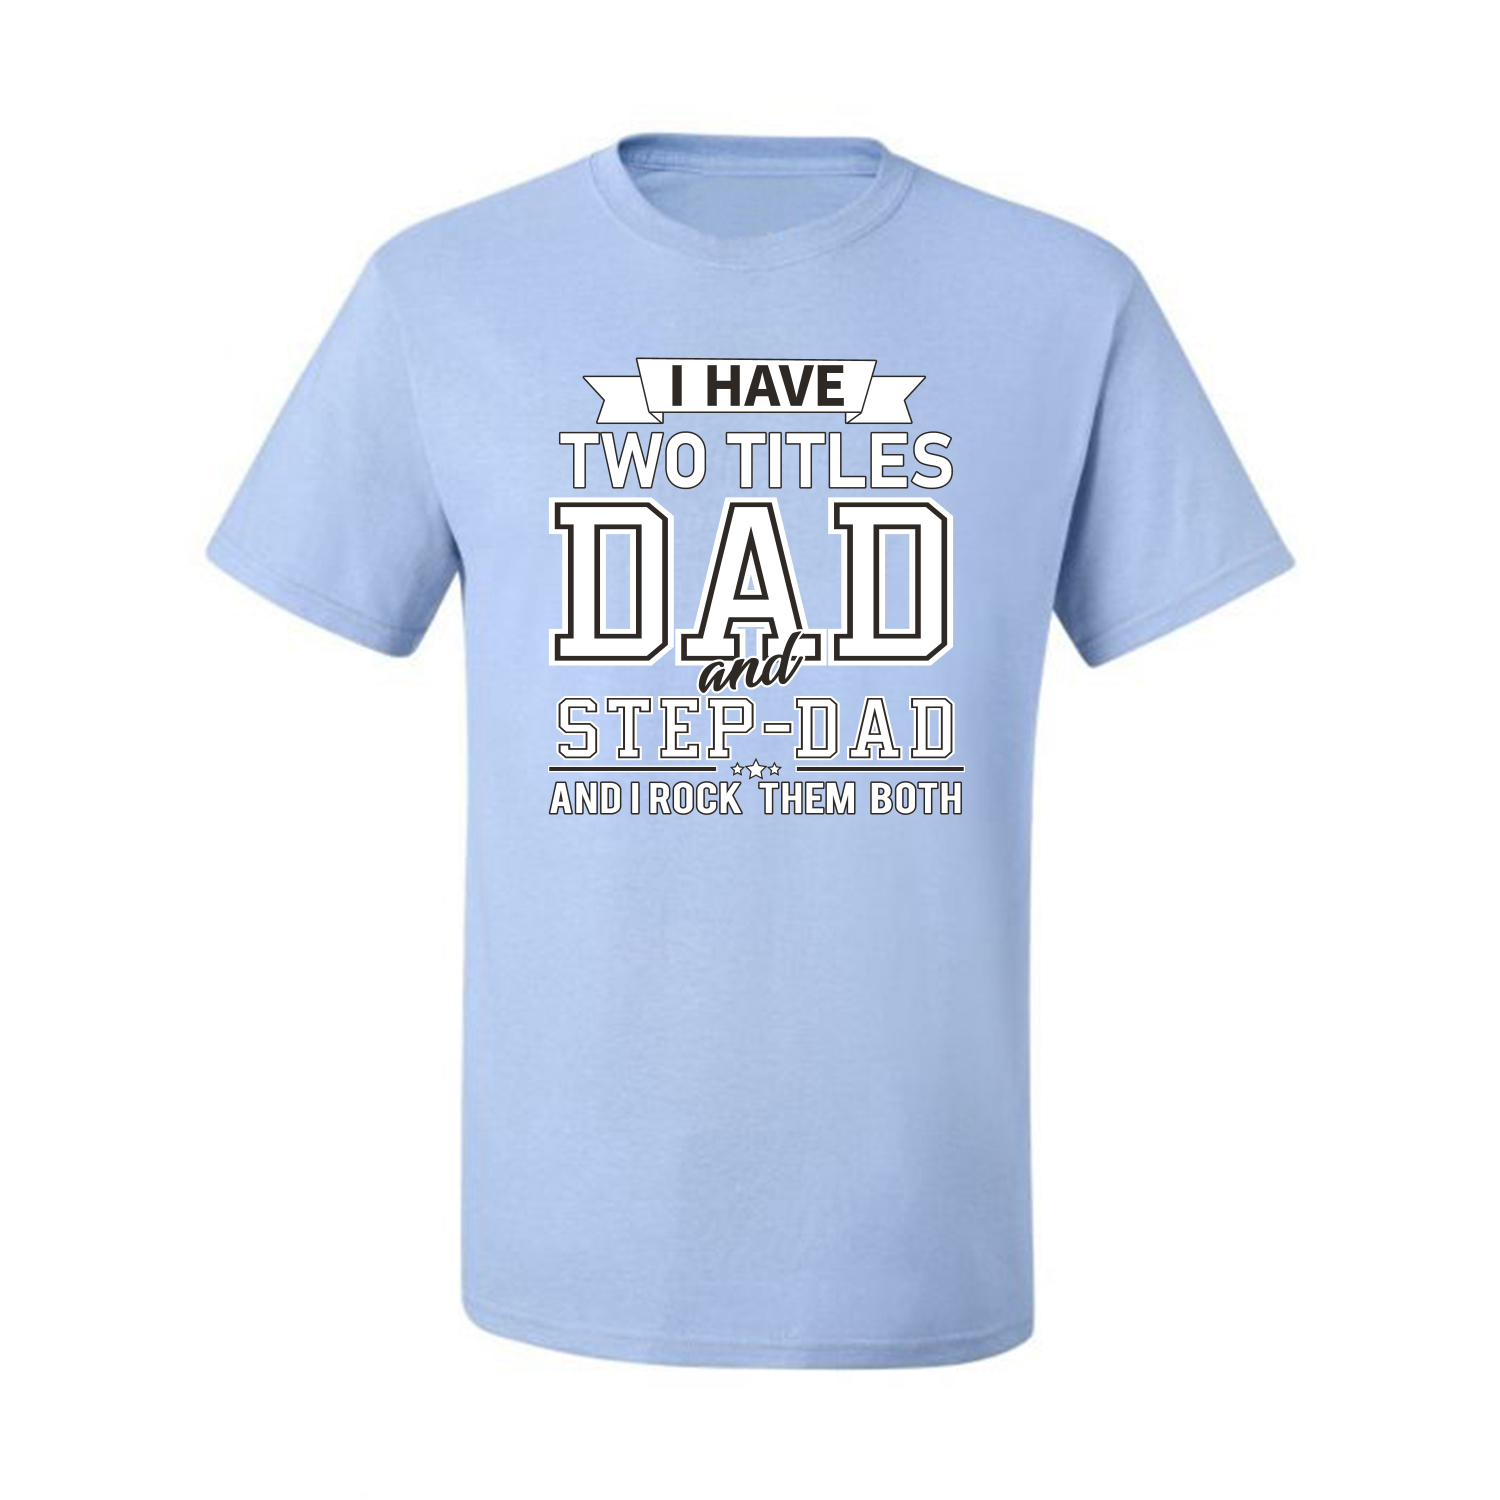 Wild Bobby,I Have Two Titles Dad and Step Dad Rock Them Both Step Dad Gift, Father's Day, Men Graphic Tees, Light Blue, 3XL - image 2 of 3